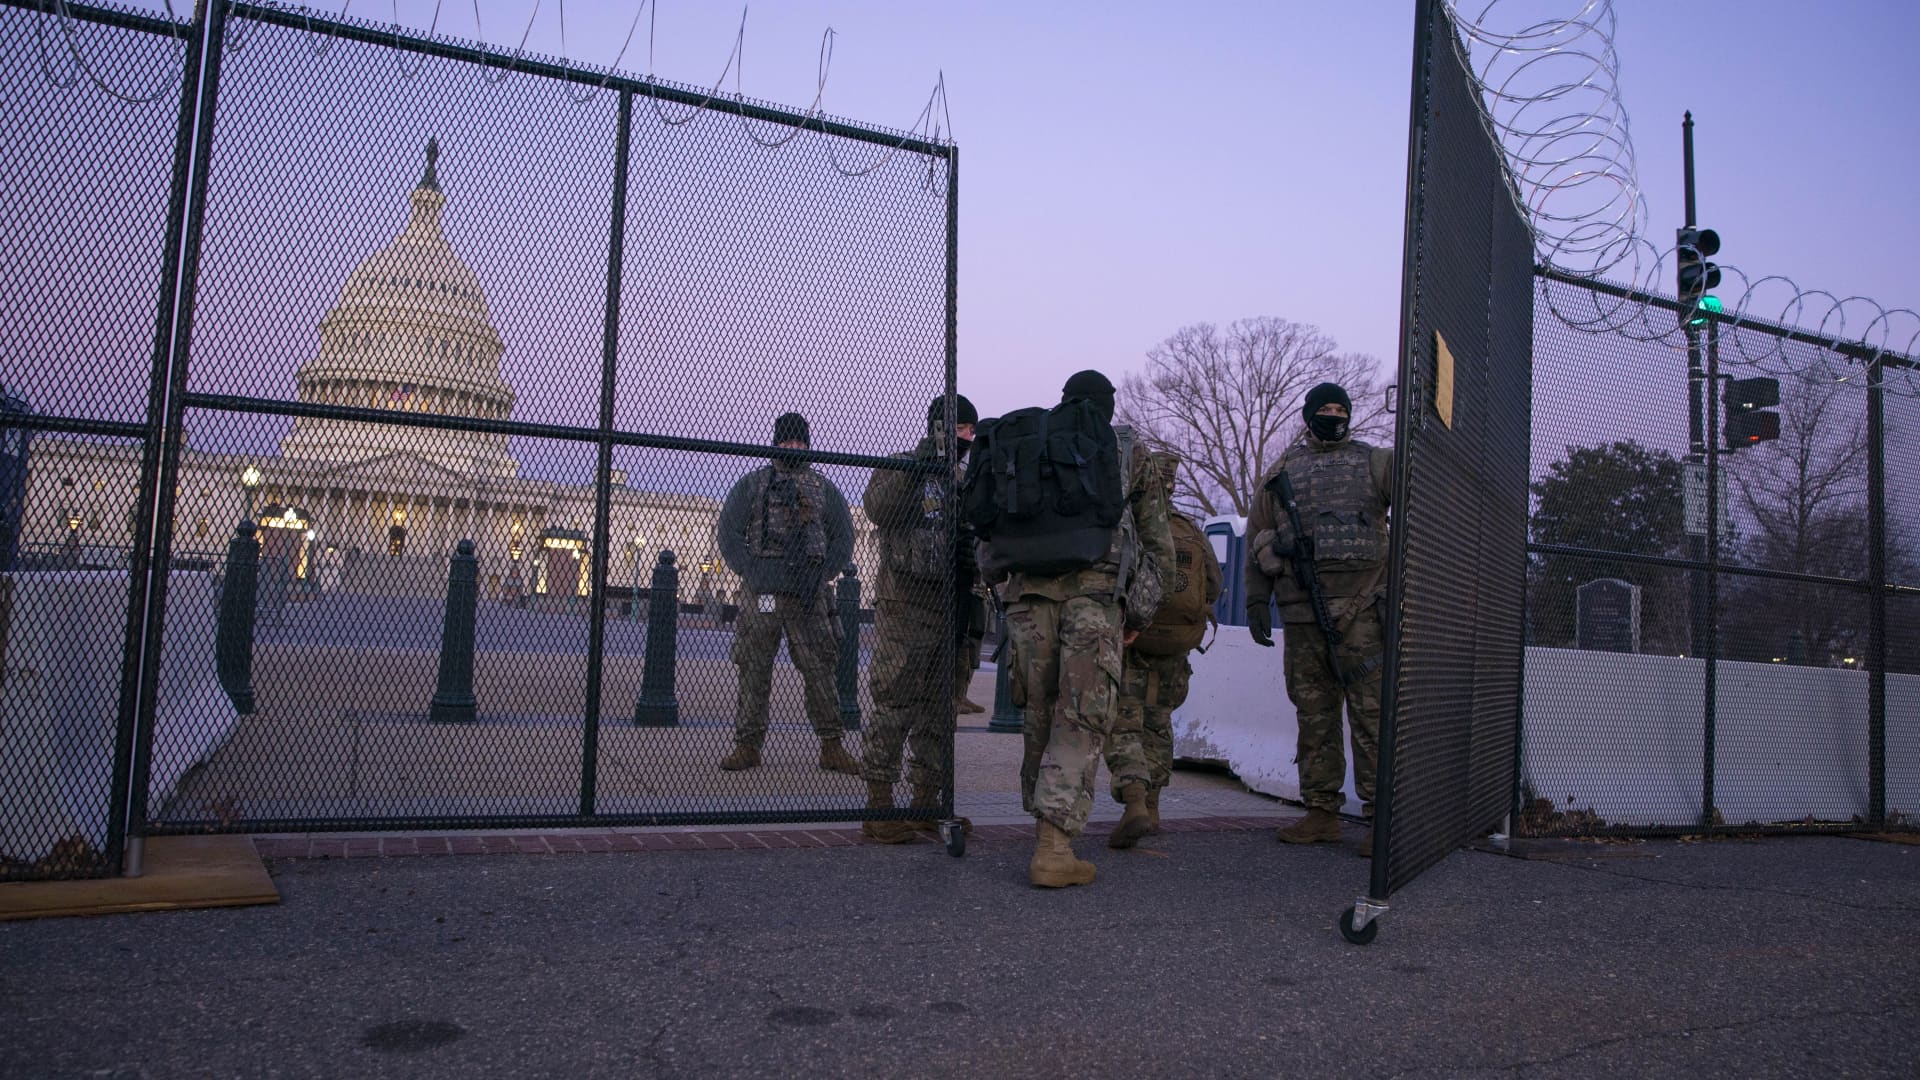 Members of the National Guard enter a gate of barbed wire fencing on U.S. Capitol grounds at sunrise on February 8, 2021 in Washington, DC. The Senate is scheduled to begin the second impeachment trial of former U.S. President Donald J. Trump on February 9.